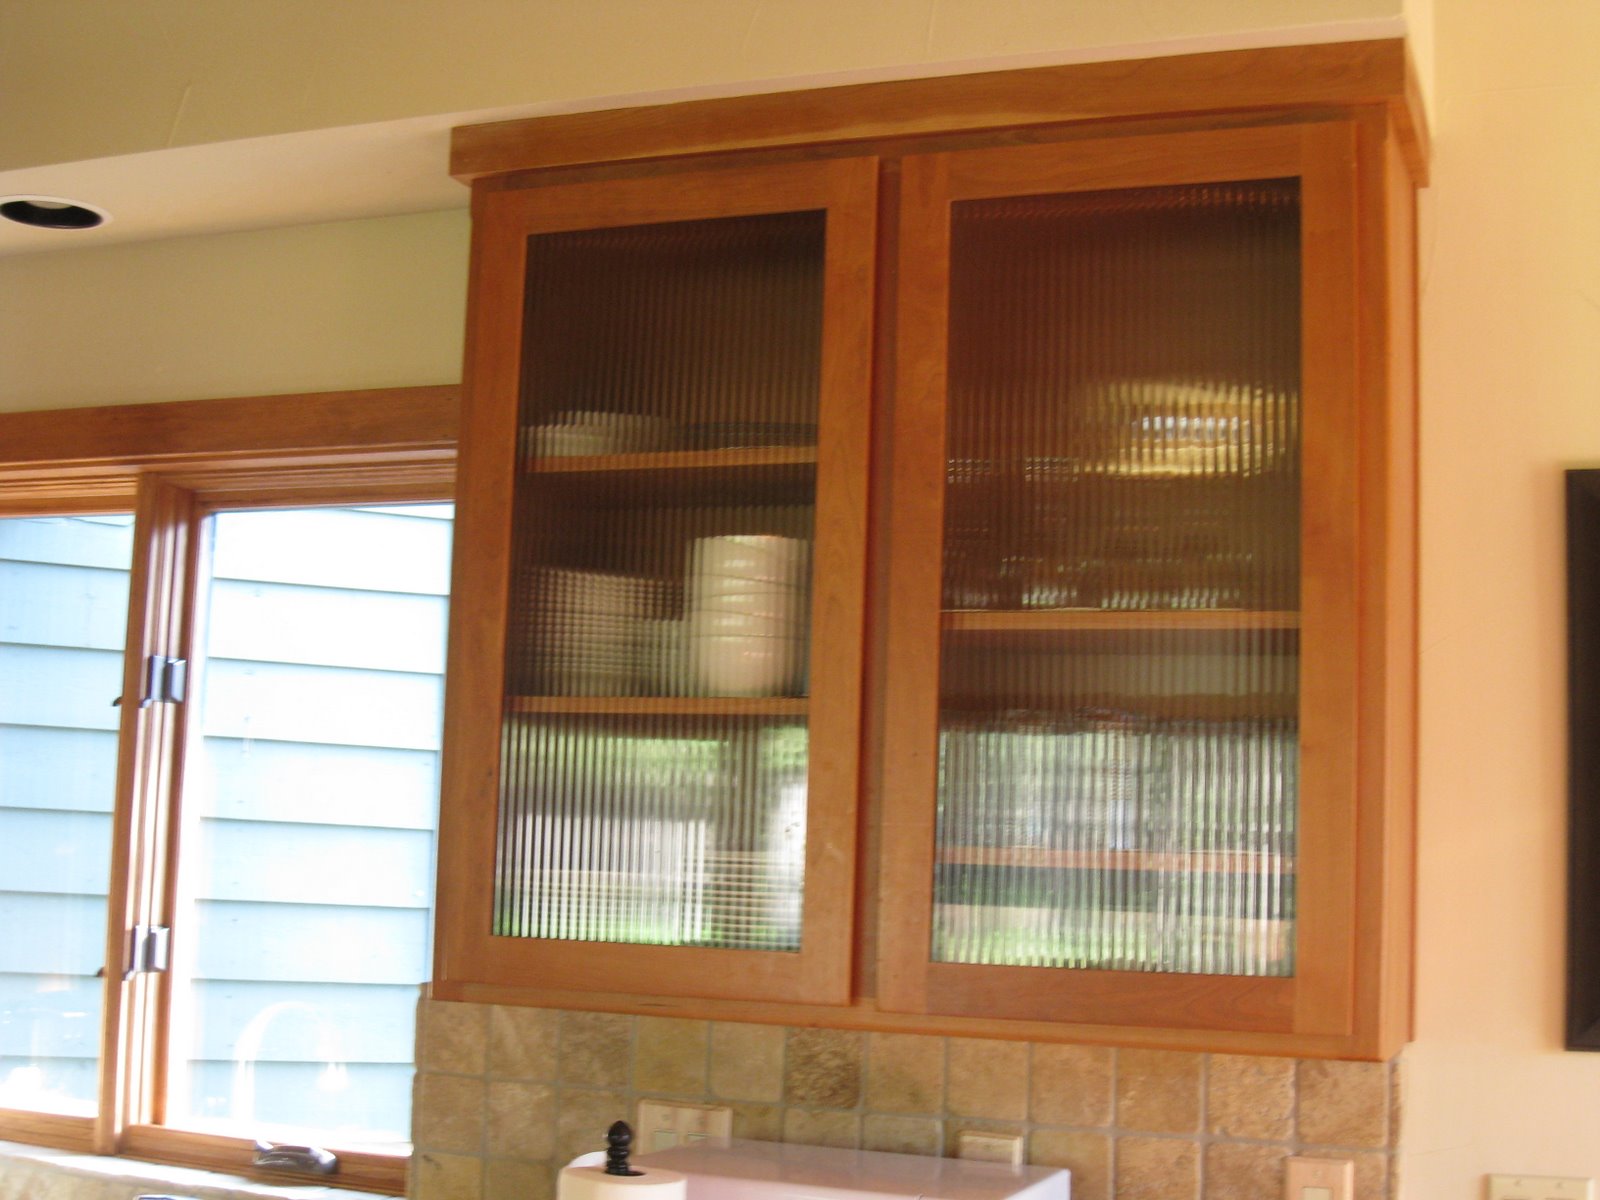 Kitchen Cabinet Door Glass Inserts on Upper Kitchen Cabinets Feature Reed Glass Wood Framed Doors   Above